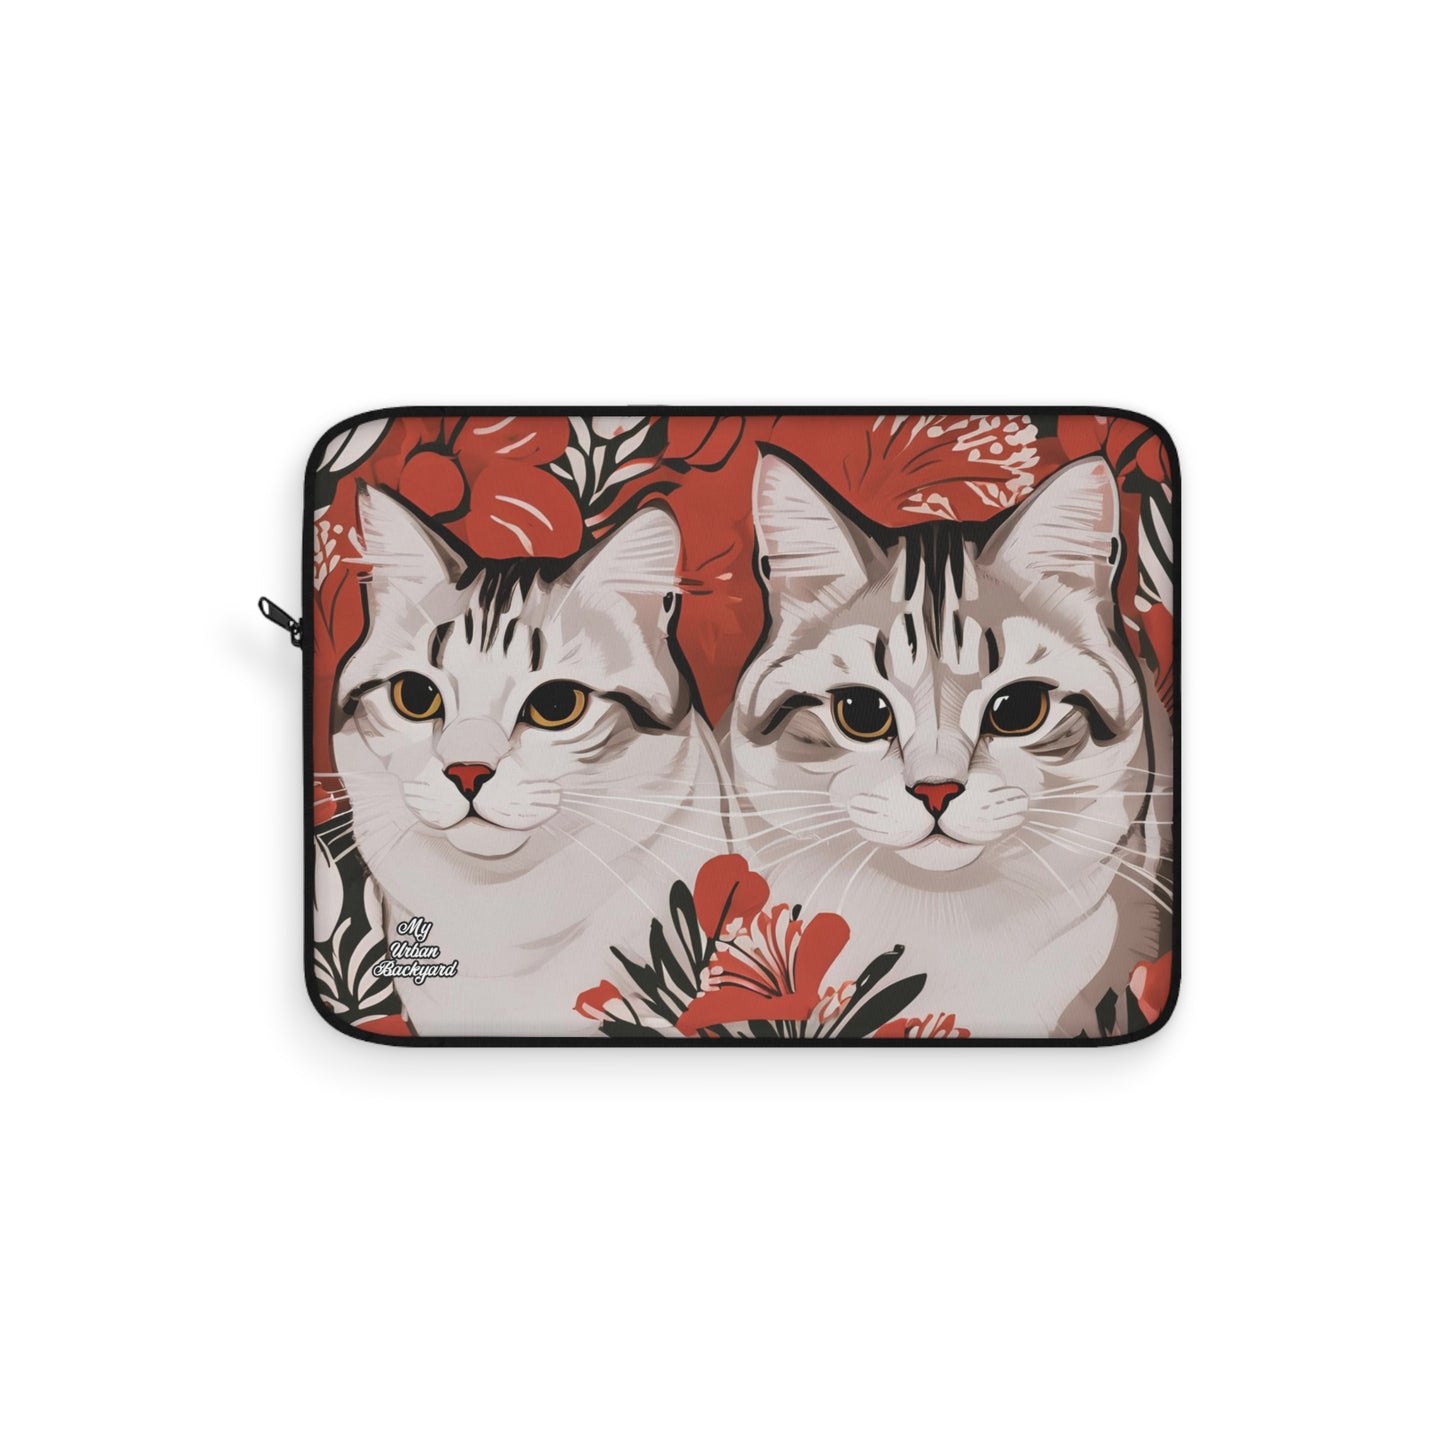 White Cats, Laptop Carrying Case, Top Loading Sleeve for School or Work